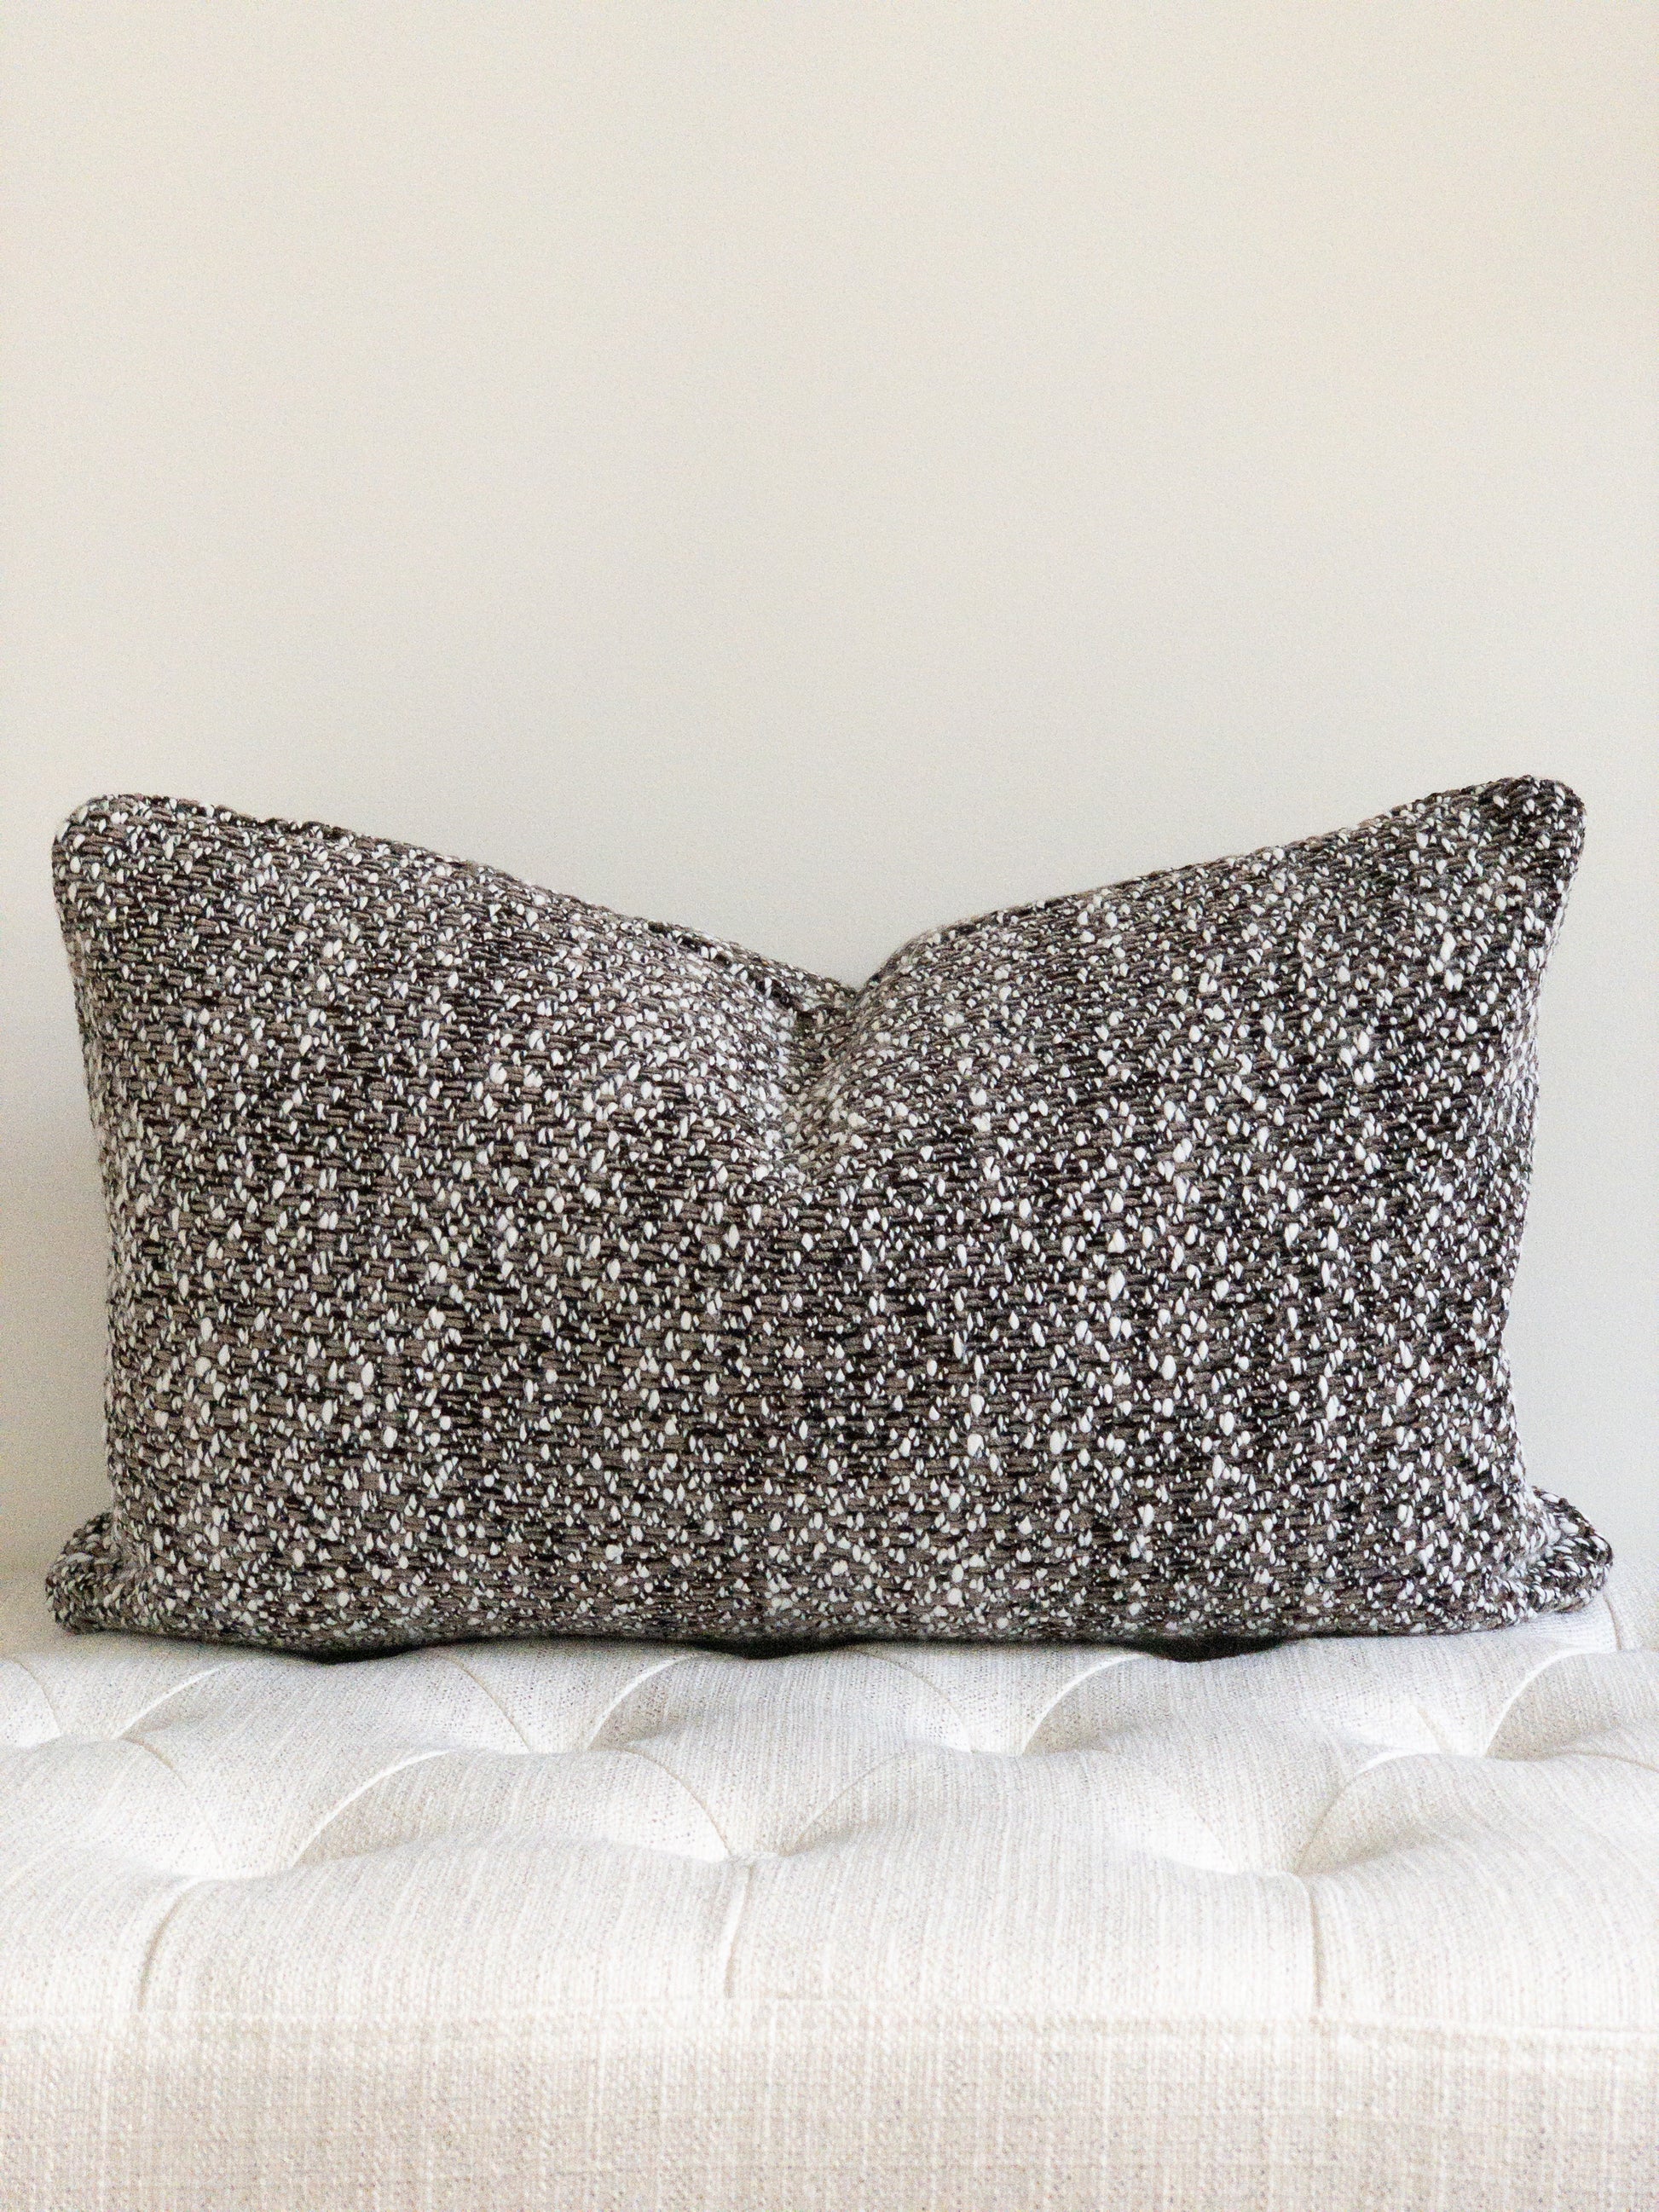 Brown and white boucle designer accent pillow lumbar